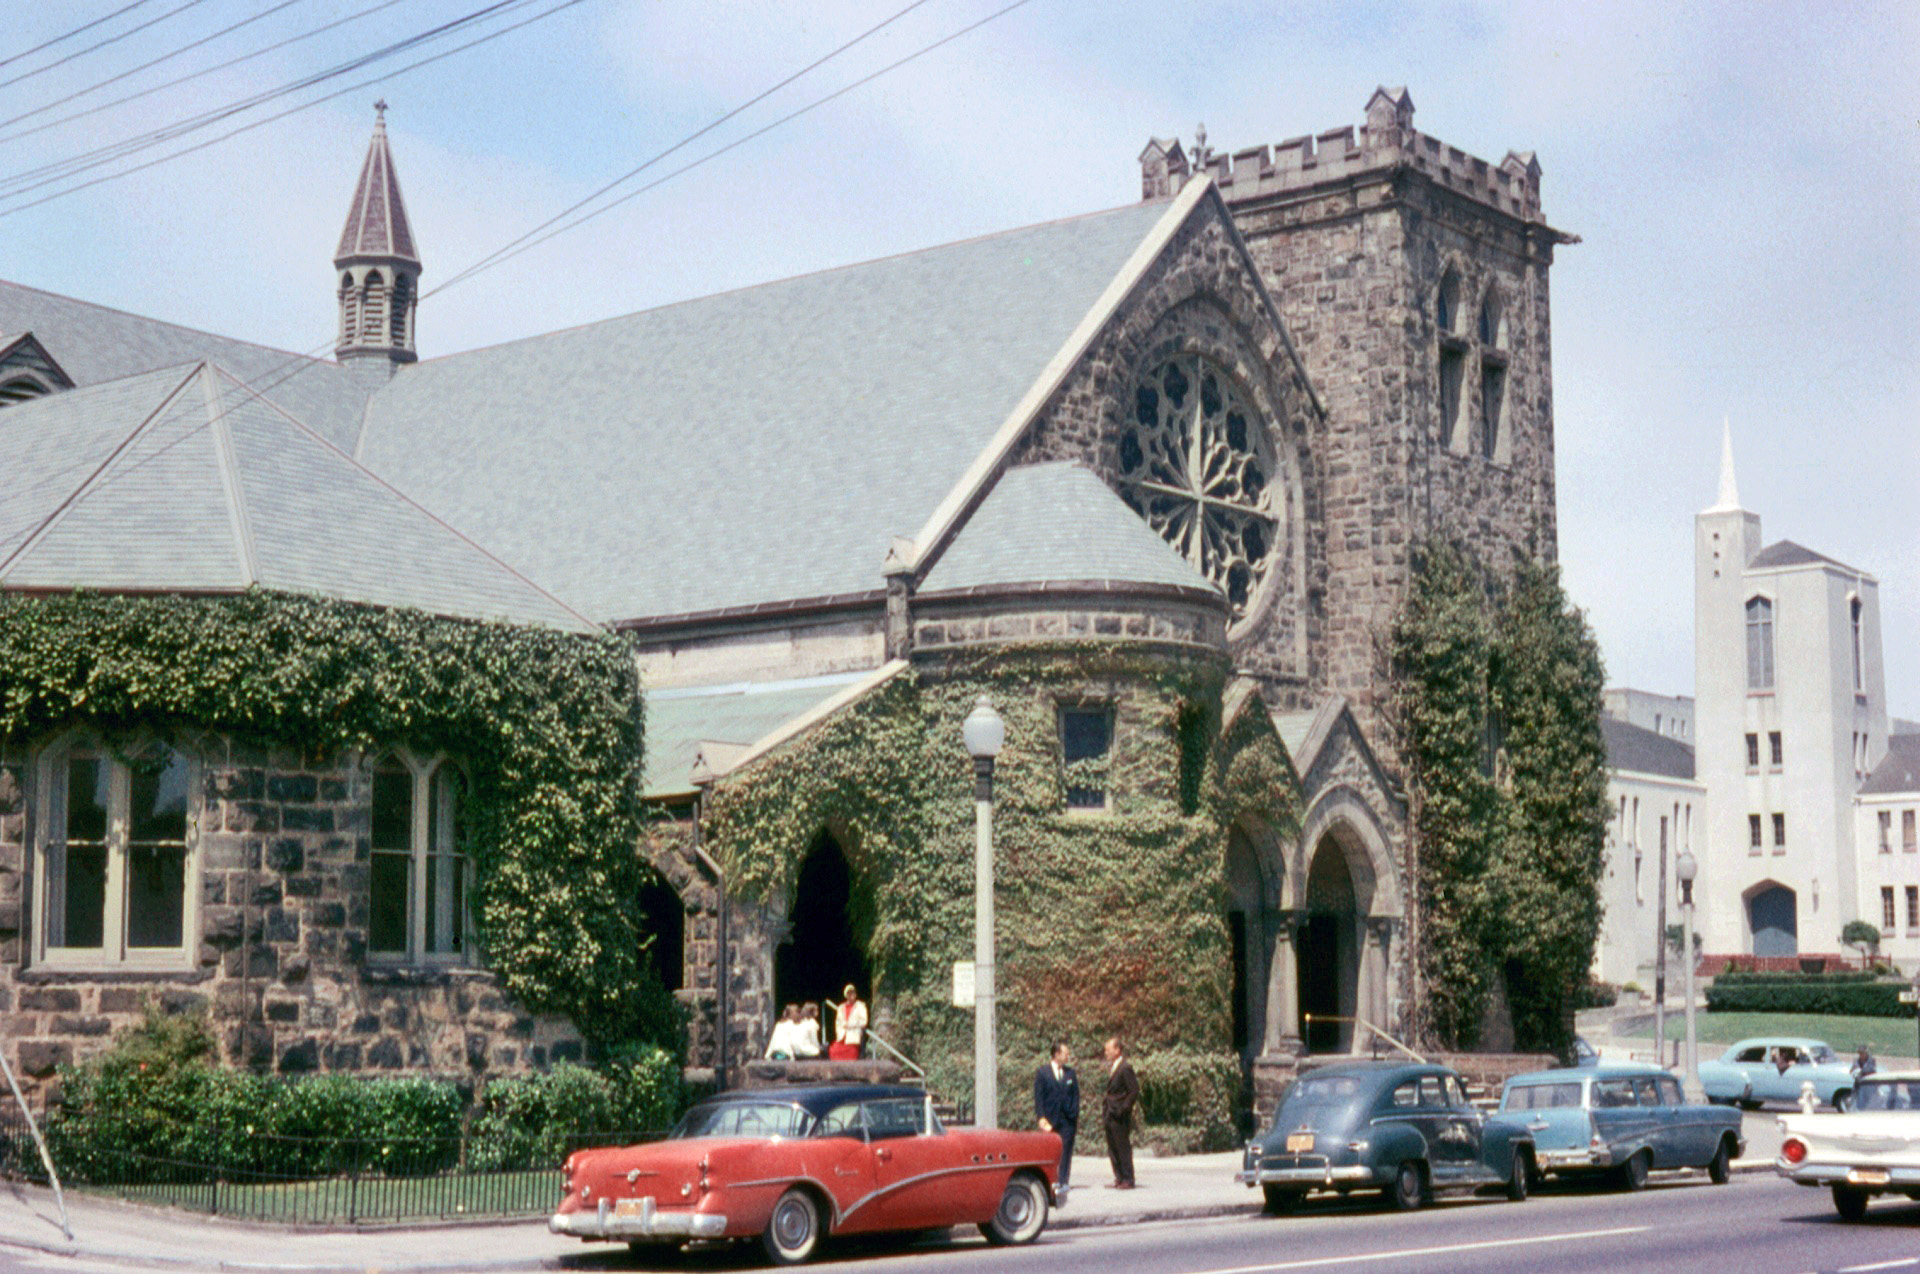 First Unitarian Church at 1187 Franklin Street in San Francisco. Built in 1889, it seems to have survived the 1906 earthquake and fire nicely. Anscochrome taken by my father in August 1959. View full size.